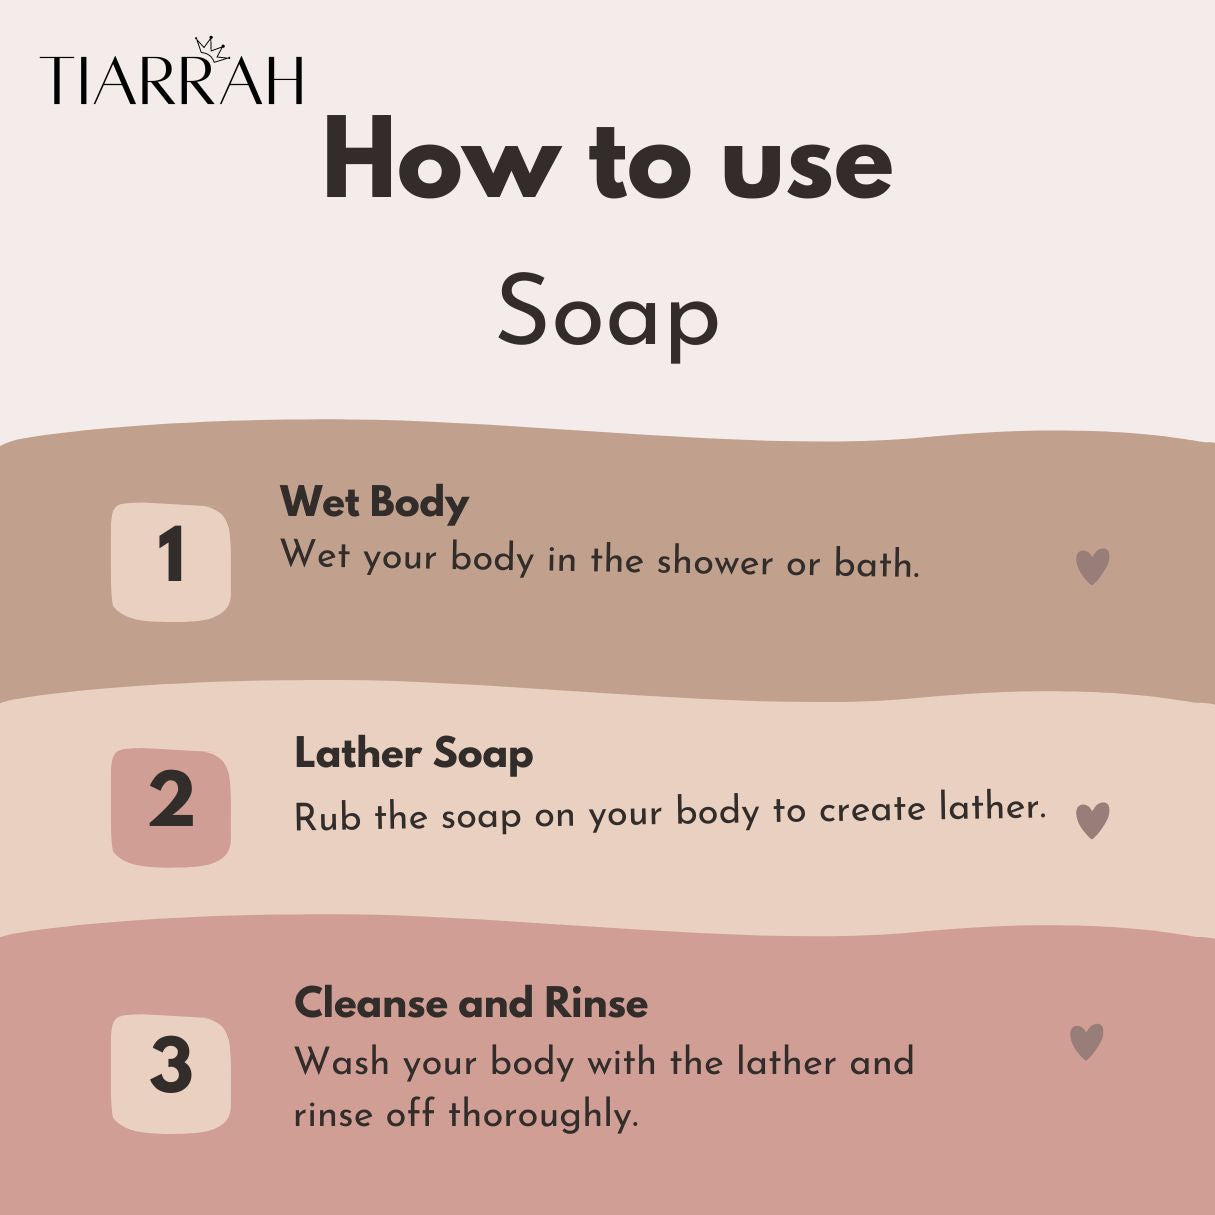 Tiarrah's Soothing Aloe Soap: Pure, Safe, Gentle - The Luxury Bath and Body Care Shop